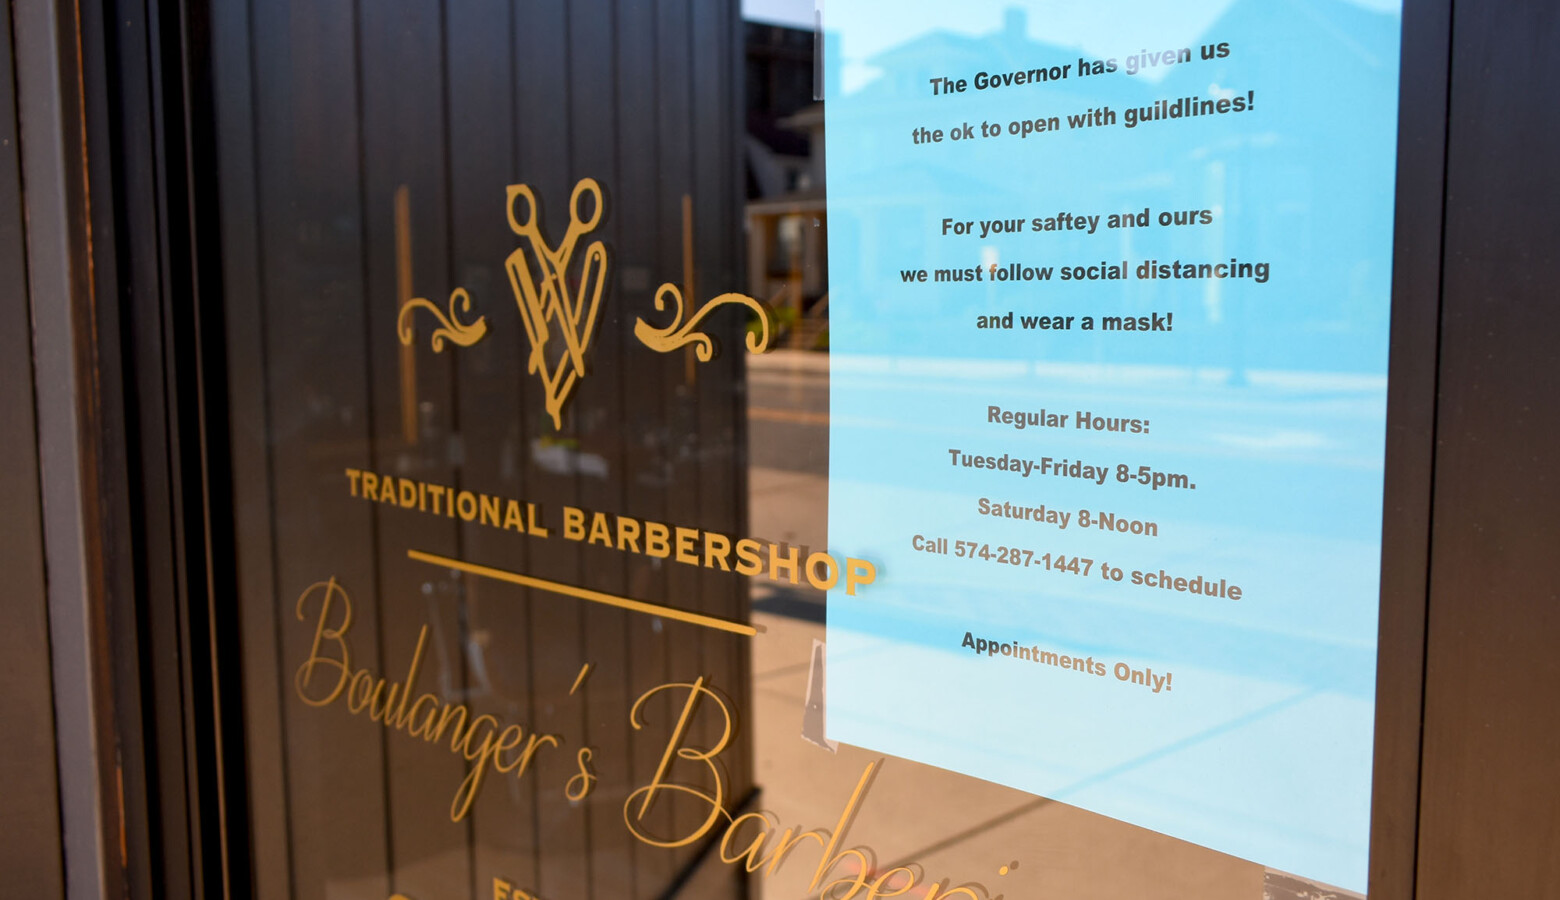 Boulanger's Barberie in South Bend reopened – with social distancing guidance – under Gov. Eric Holcomb's "Back On Track" plan. (Justin Hicks/IPB News)